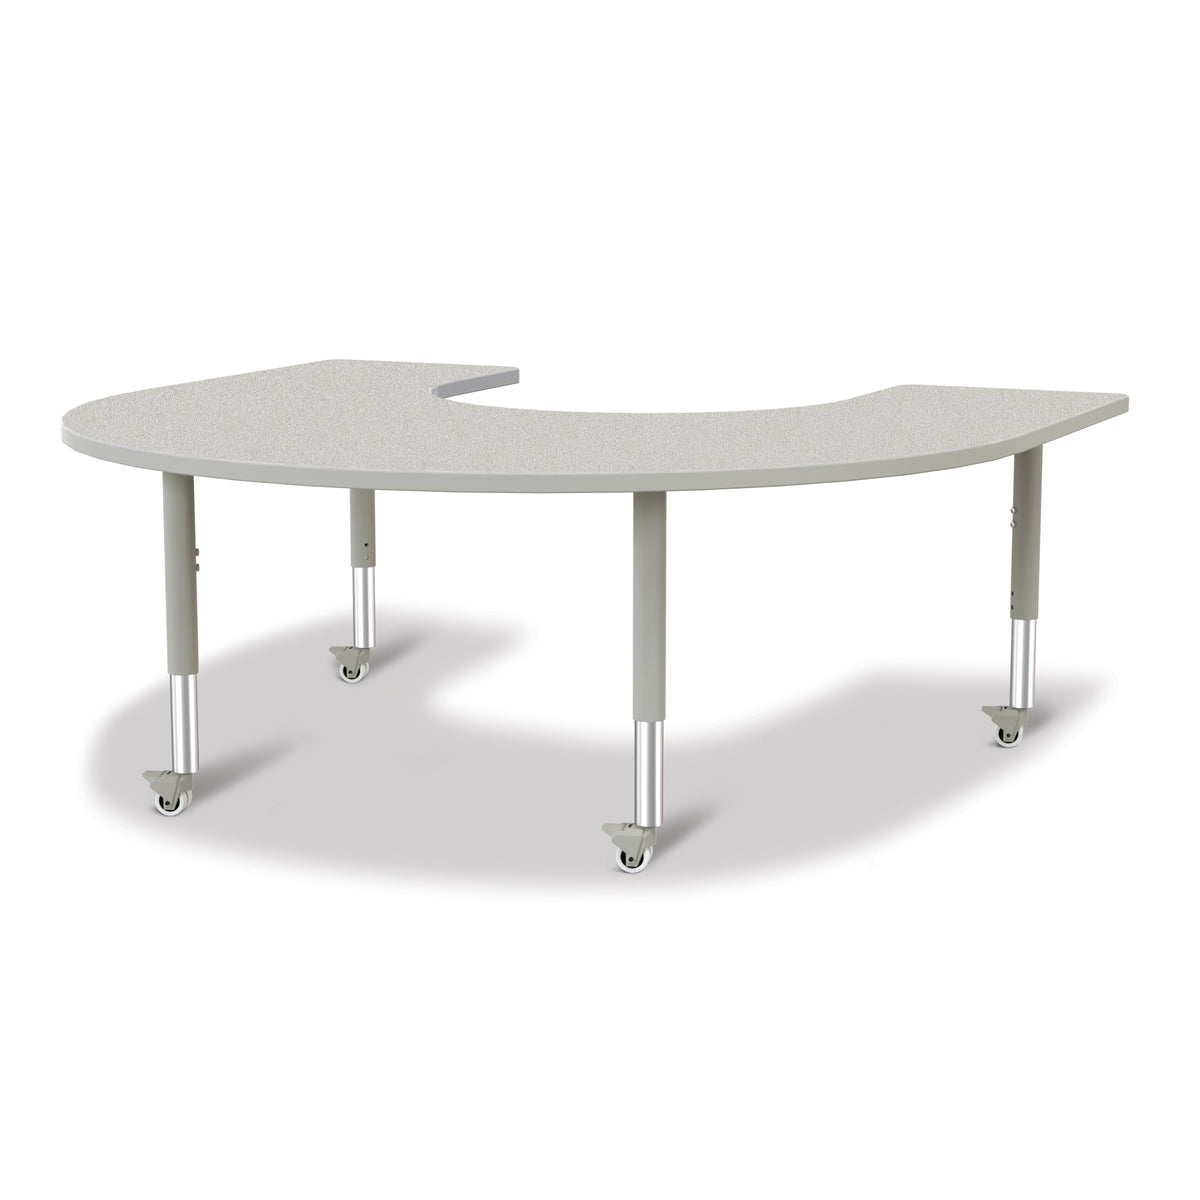 6445JCM000, Berries Horseshoe Activity Table - 66" X 60", Mobile - Freckled Gray/Gray/Gray